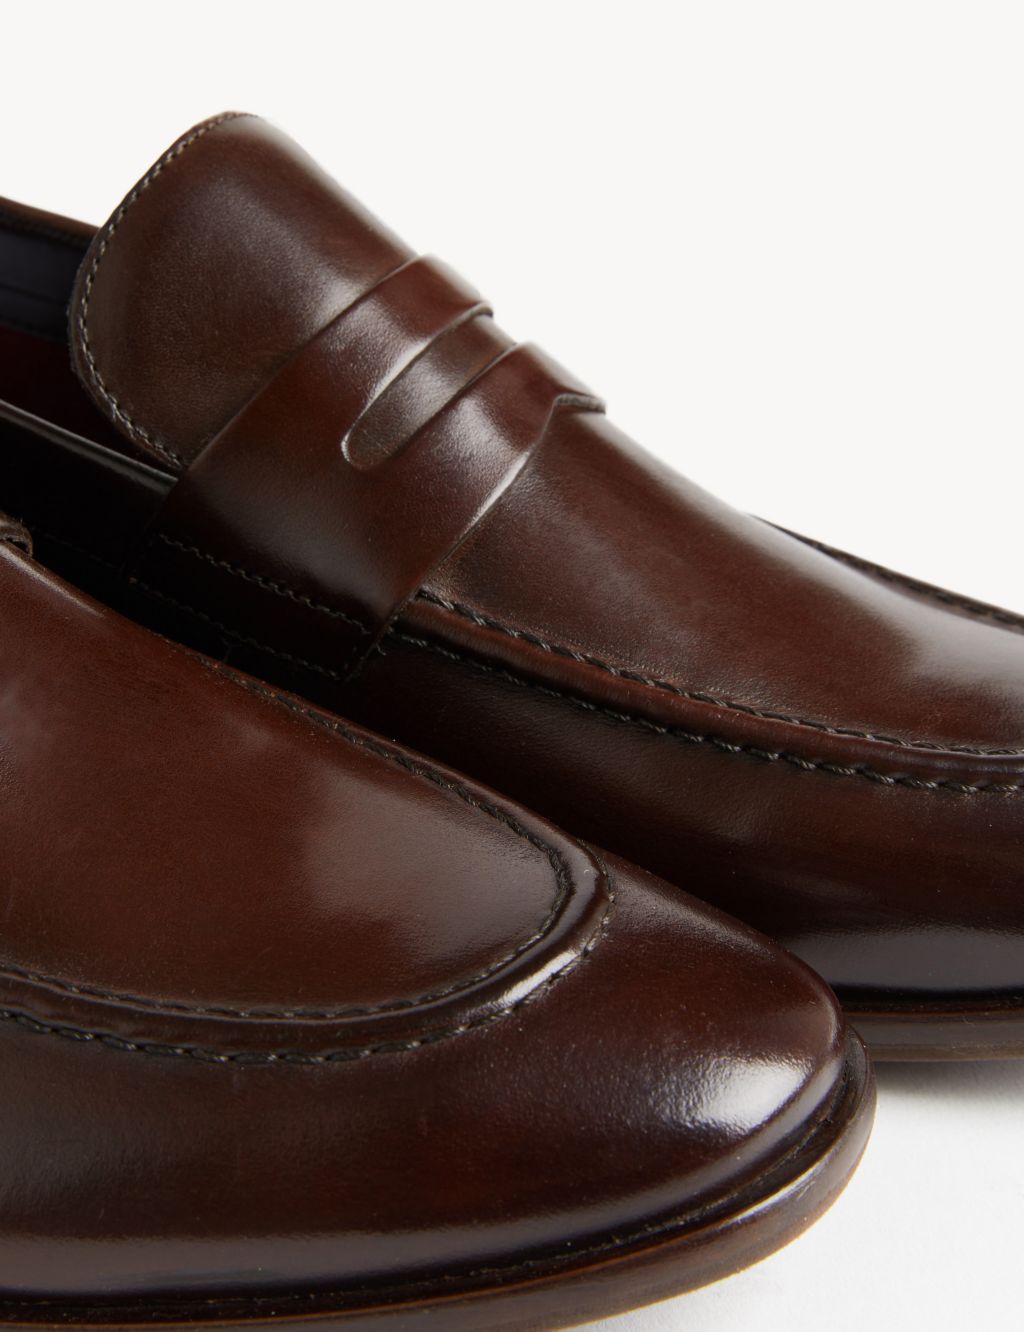 Leather Slip-On Loafers image 3